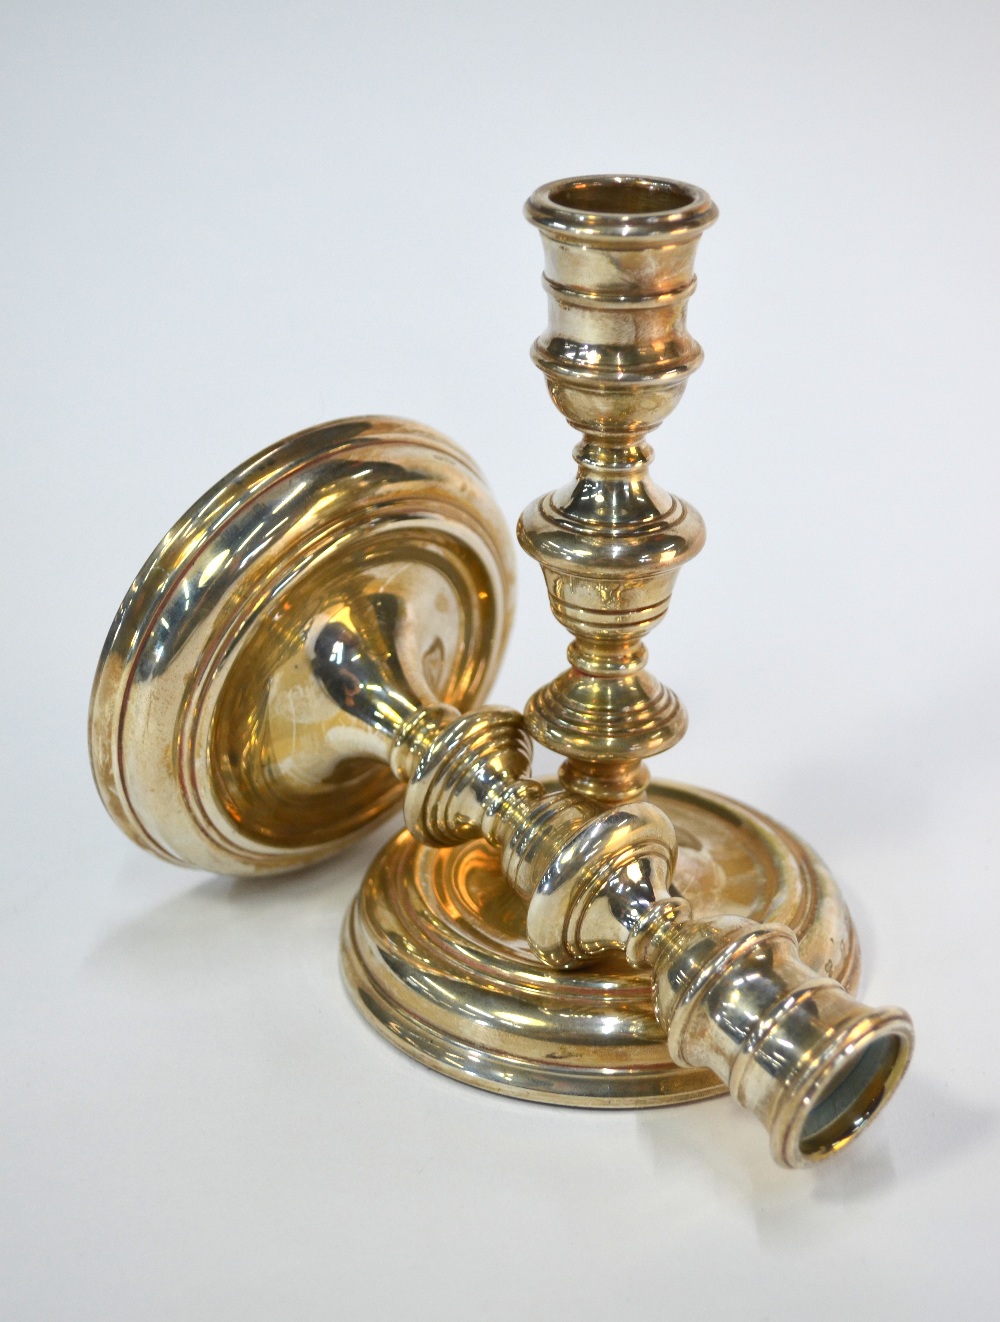 A pair of loaded silver baluster candlesticks in the early 18th century manner, Day-Mar - Image 2 of 7